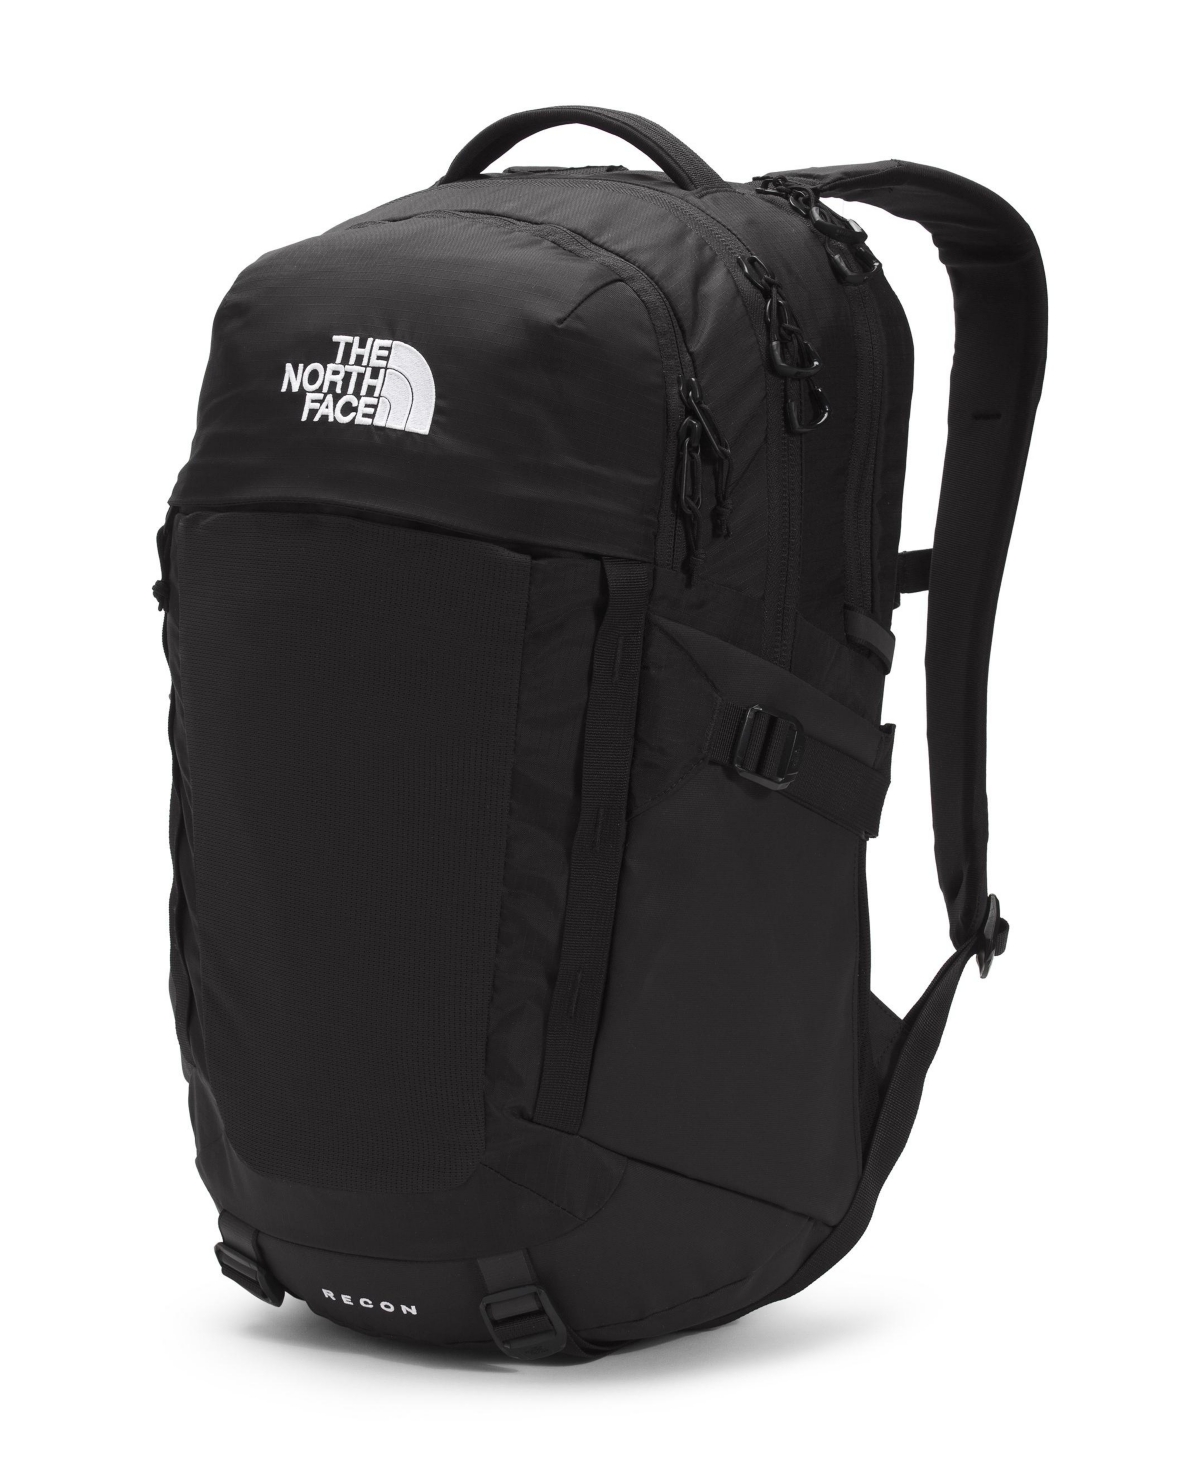 THE NORTH FACE MEN'S RECON BACKPACK